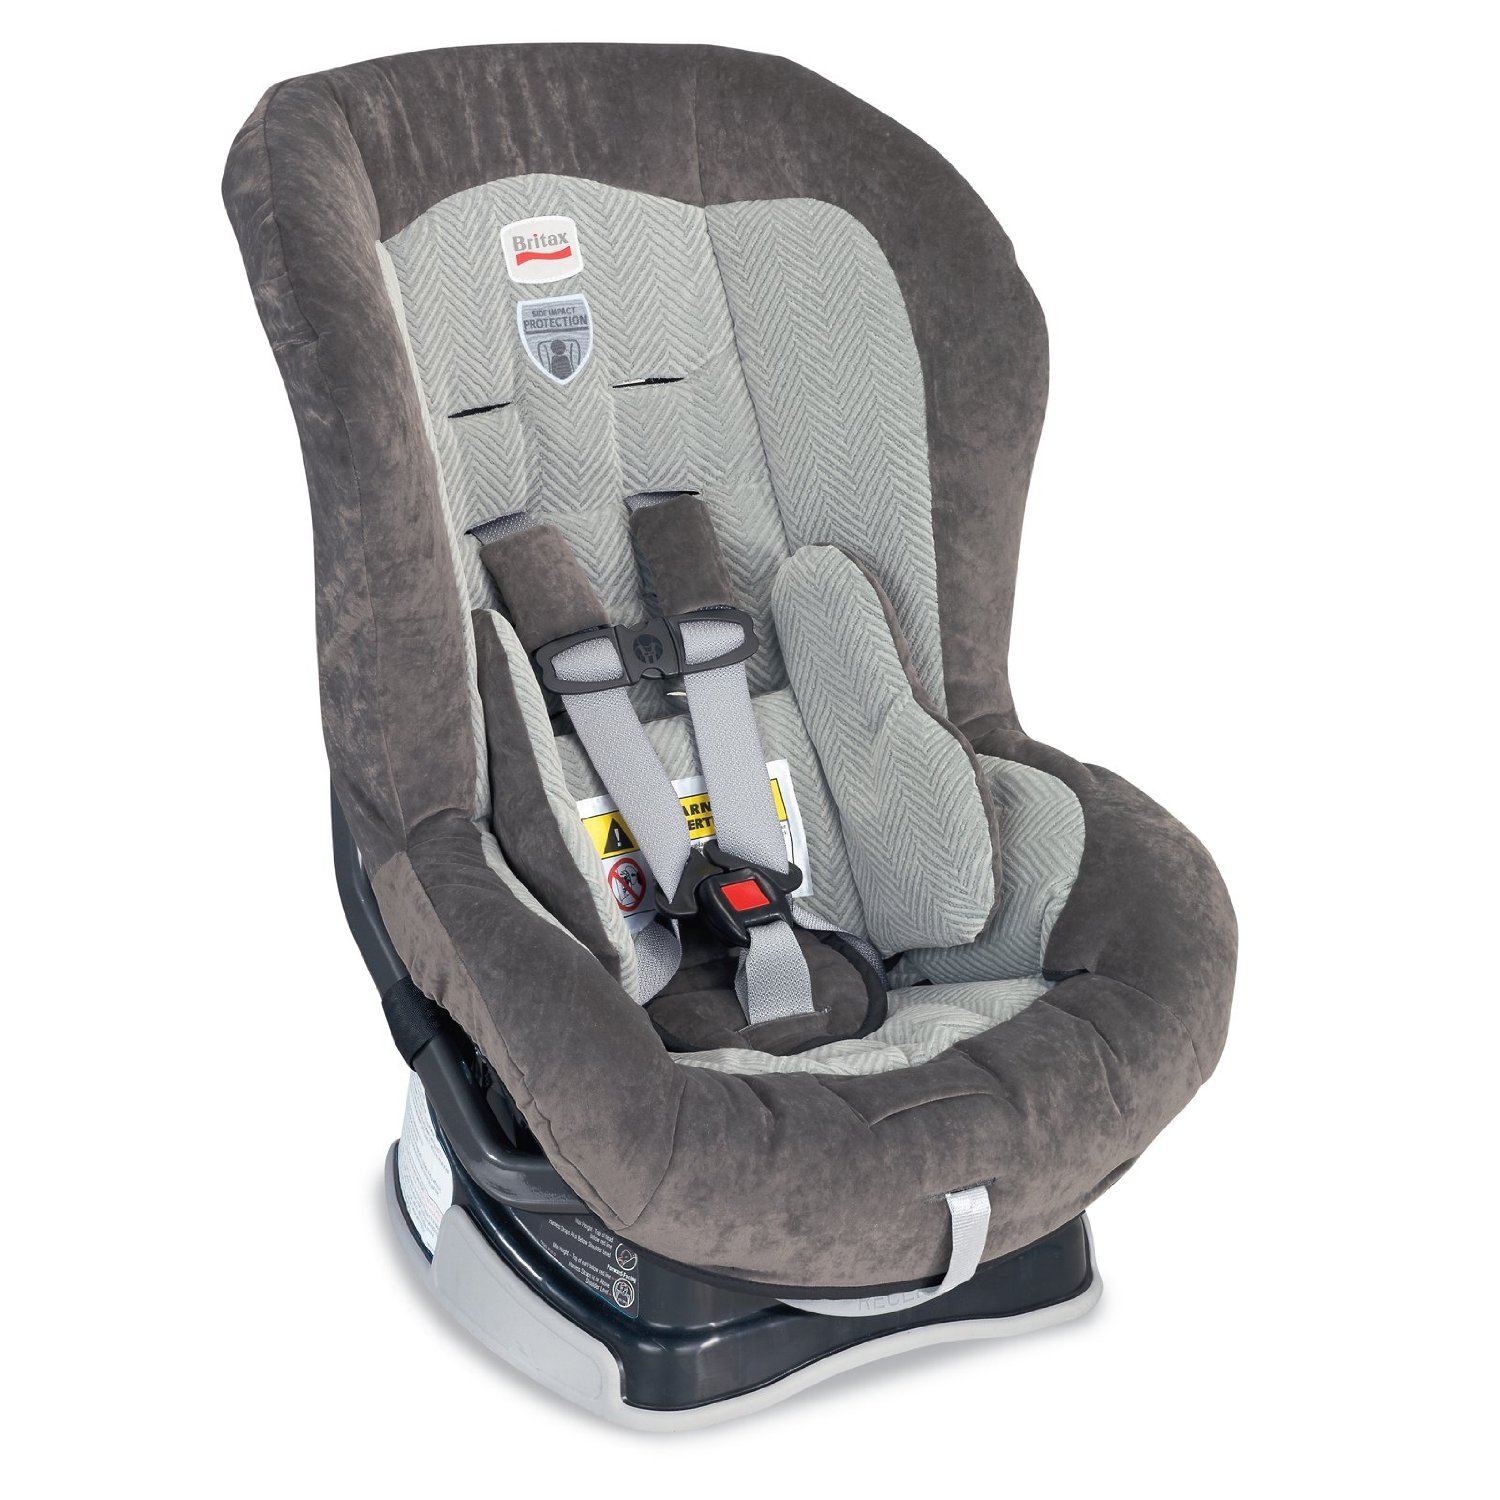 Best Infant Car Seats and Strollers | Lucie's List